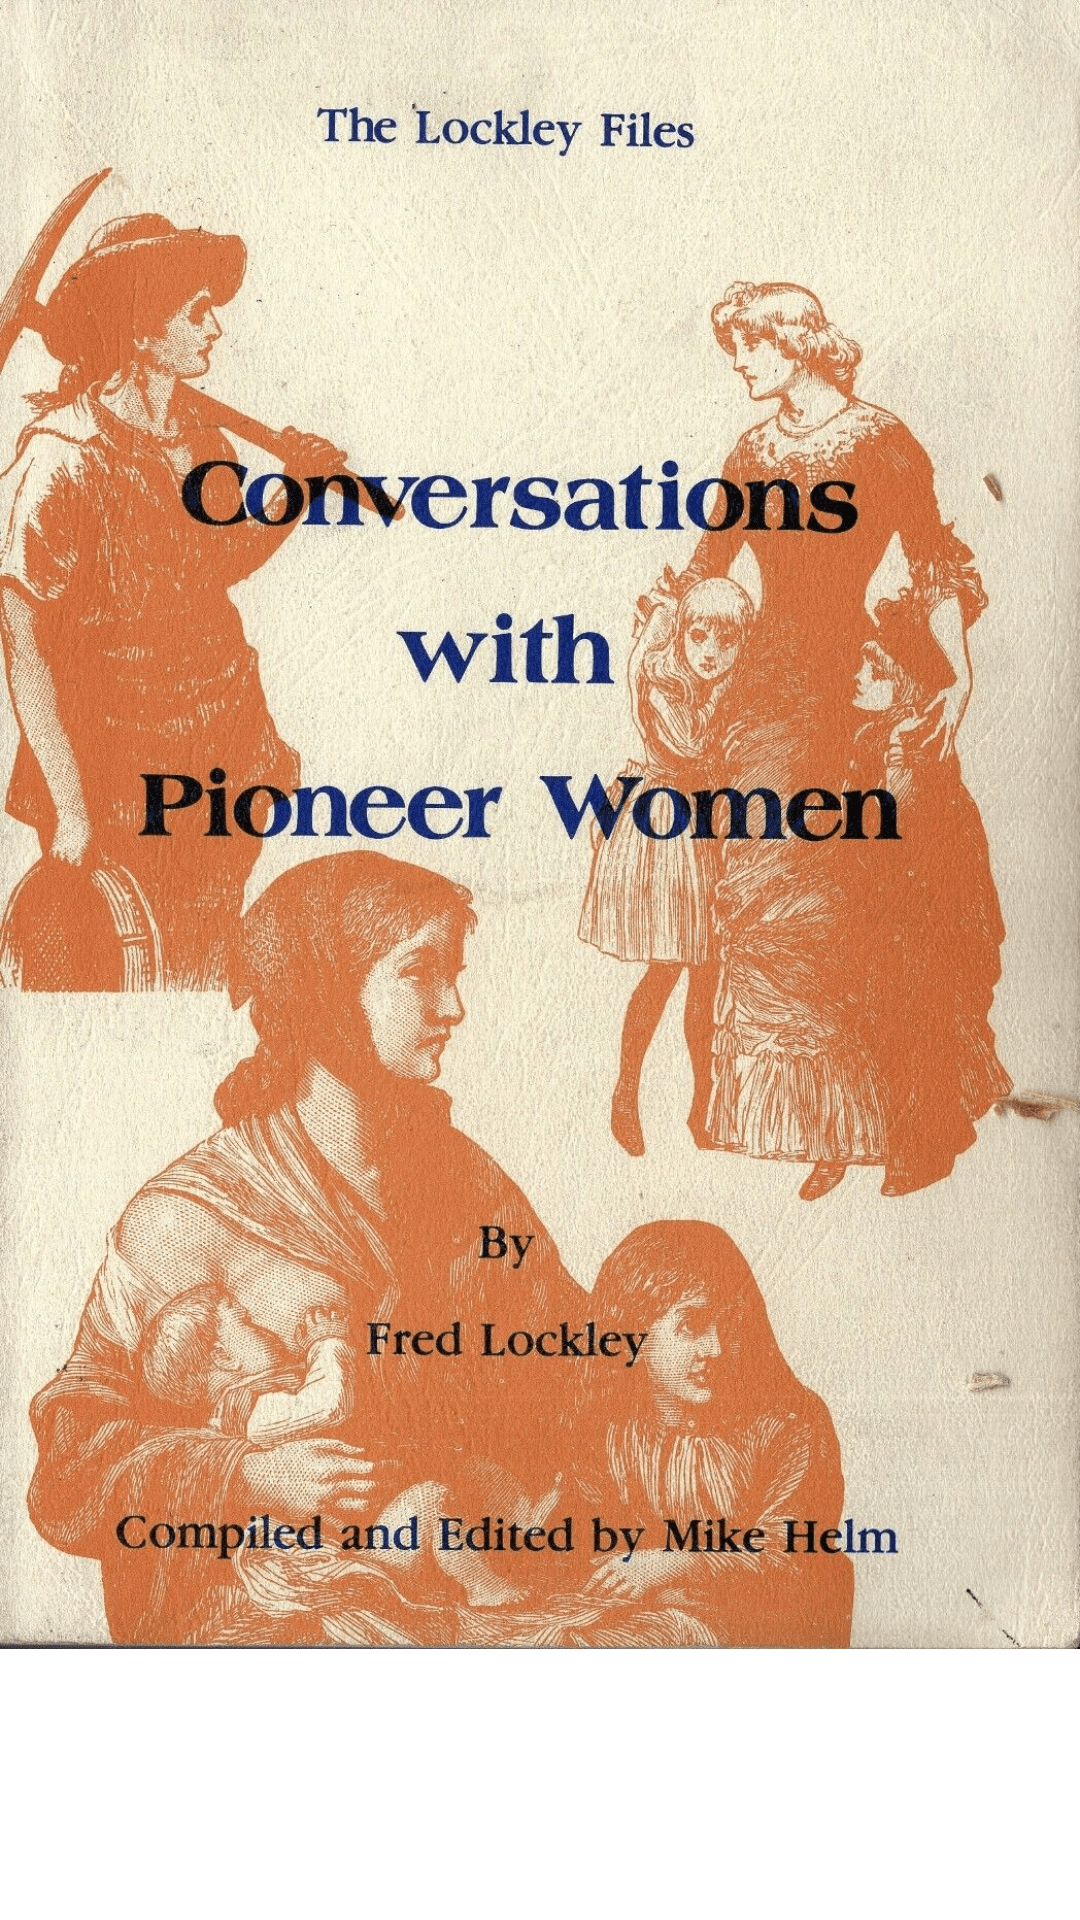 Conversations with Pioneer Women by Fred Lockley